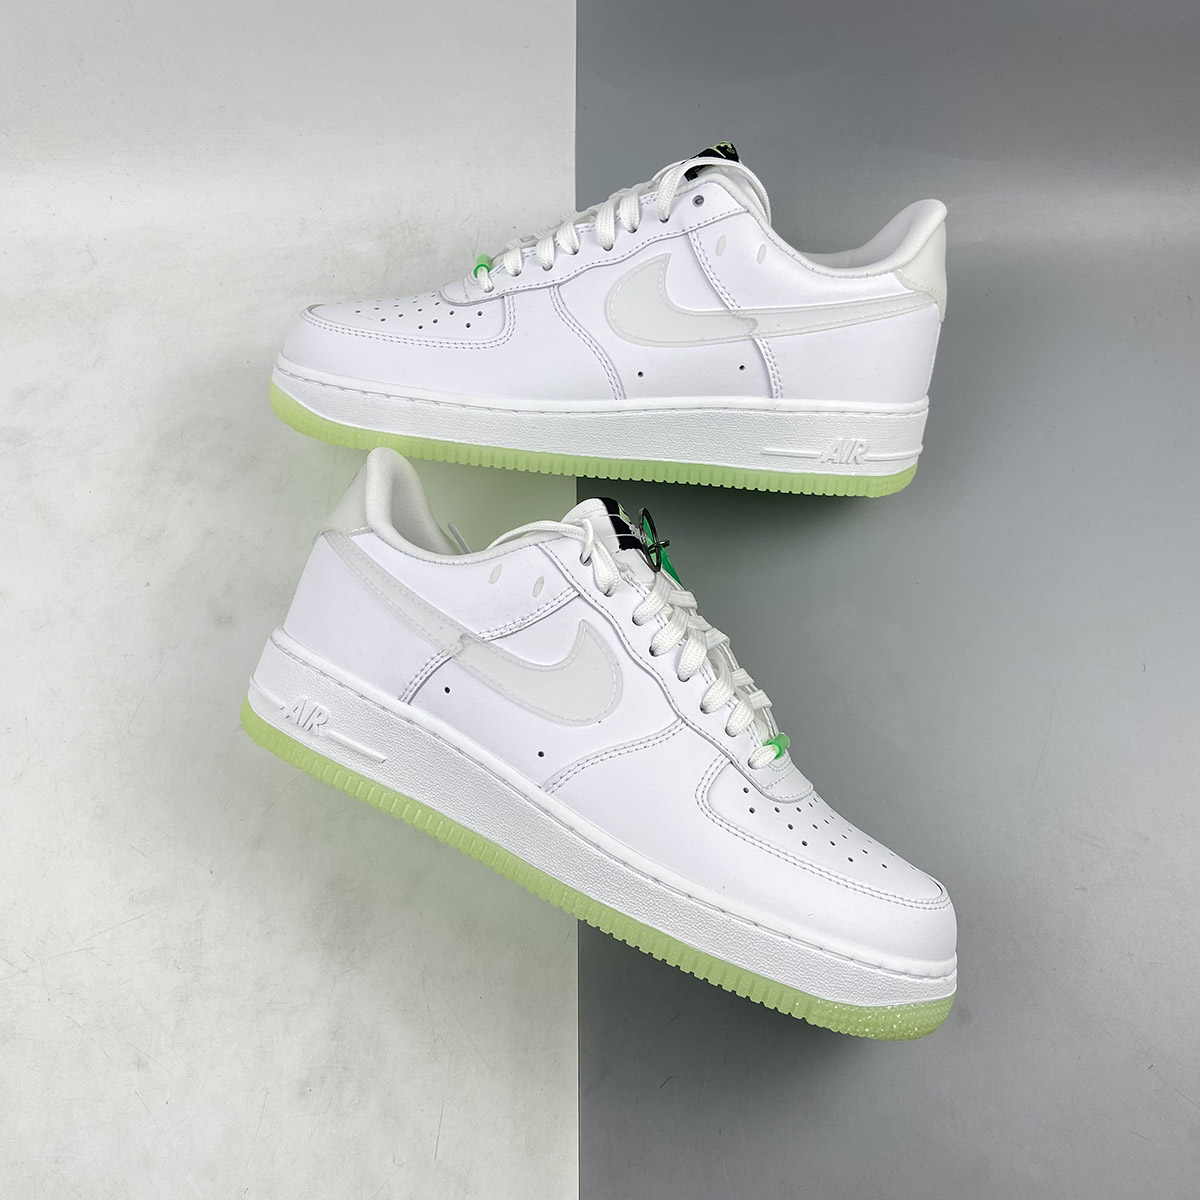 Nike Air Force 1 Low Have A Nike Day White Glow For Sale The Sole Line